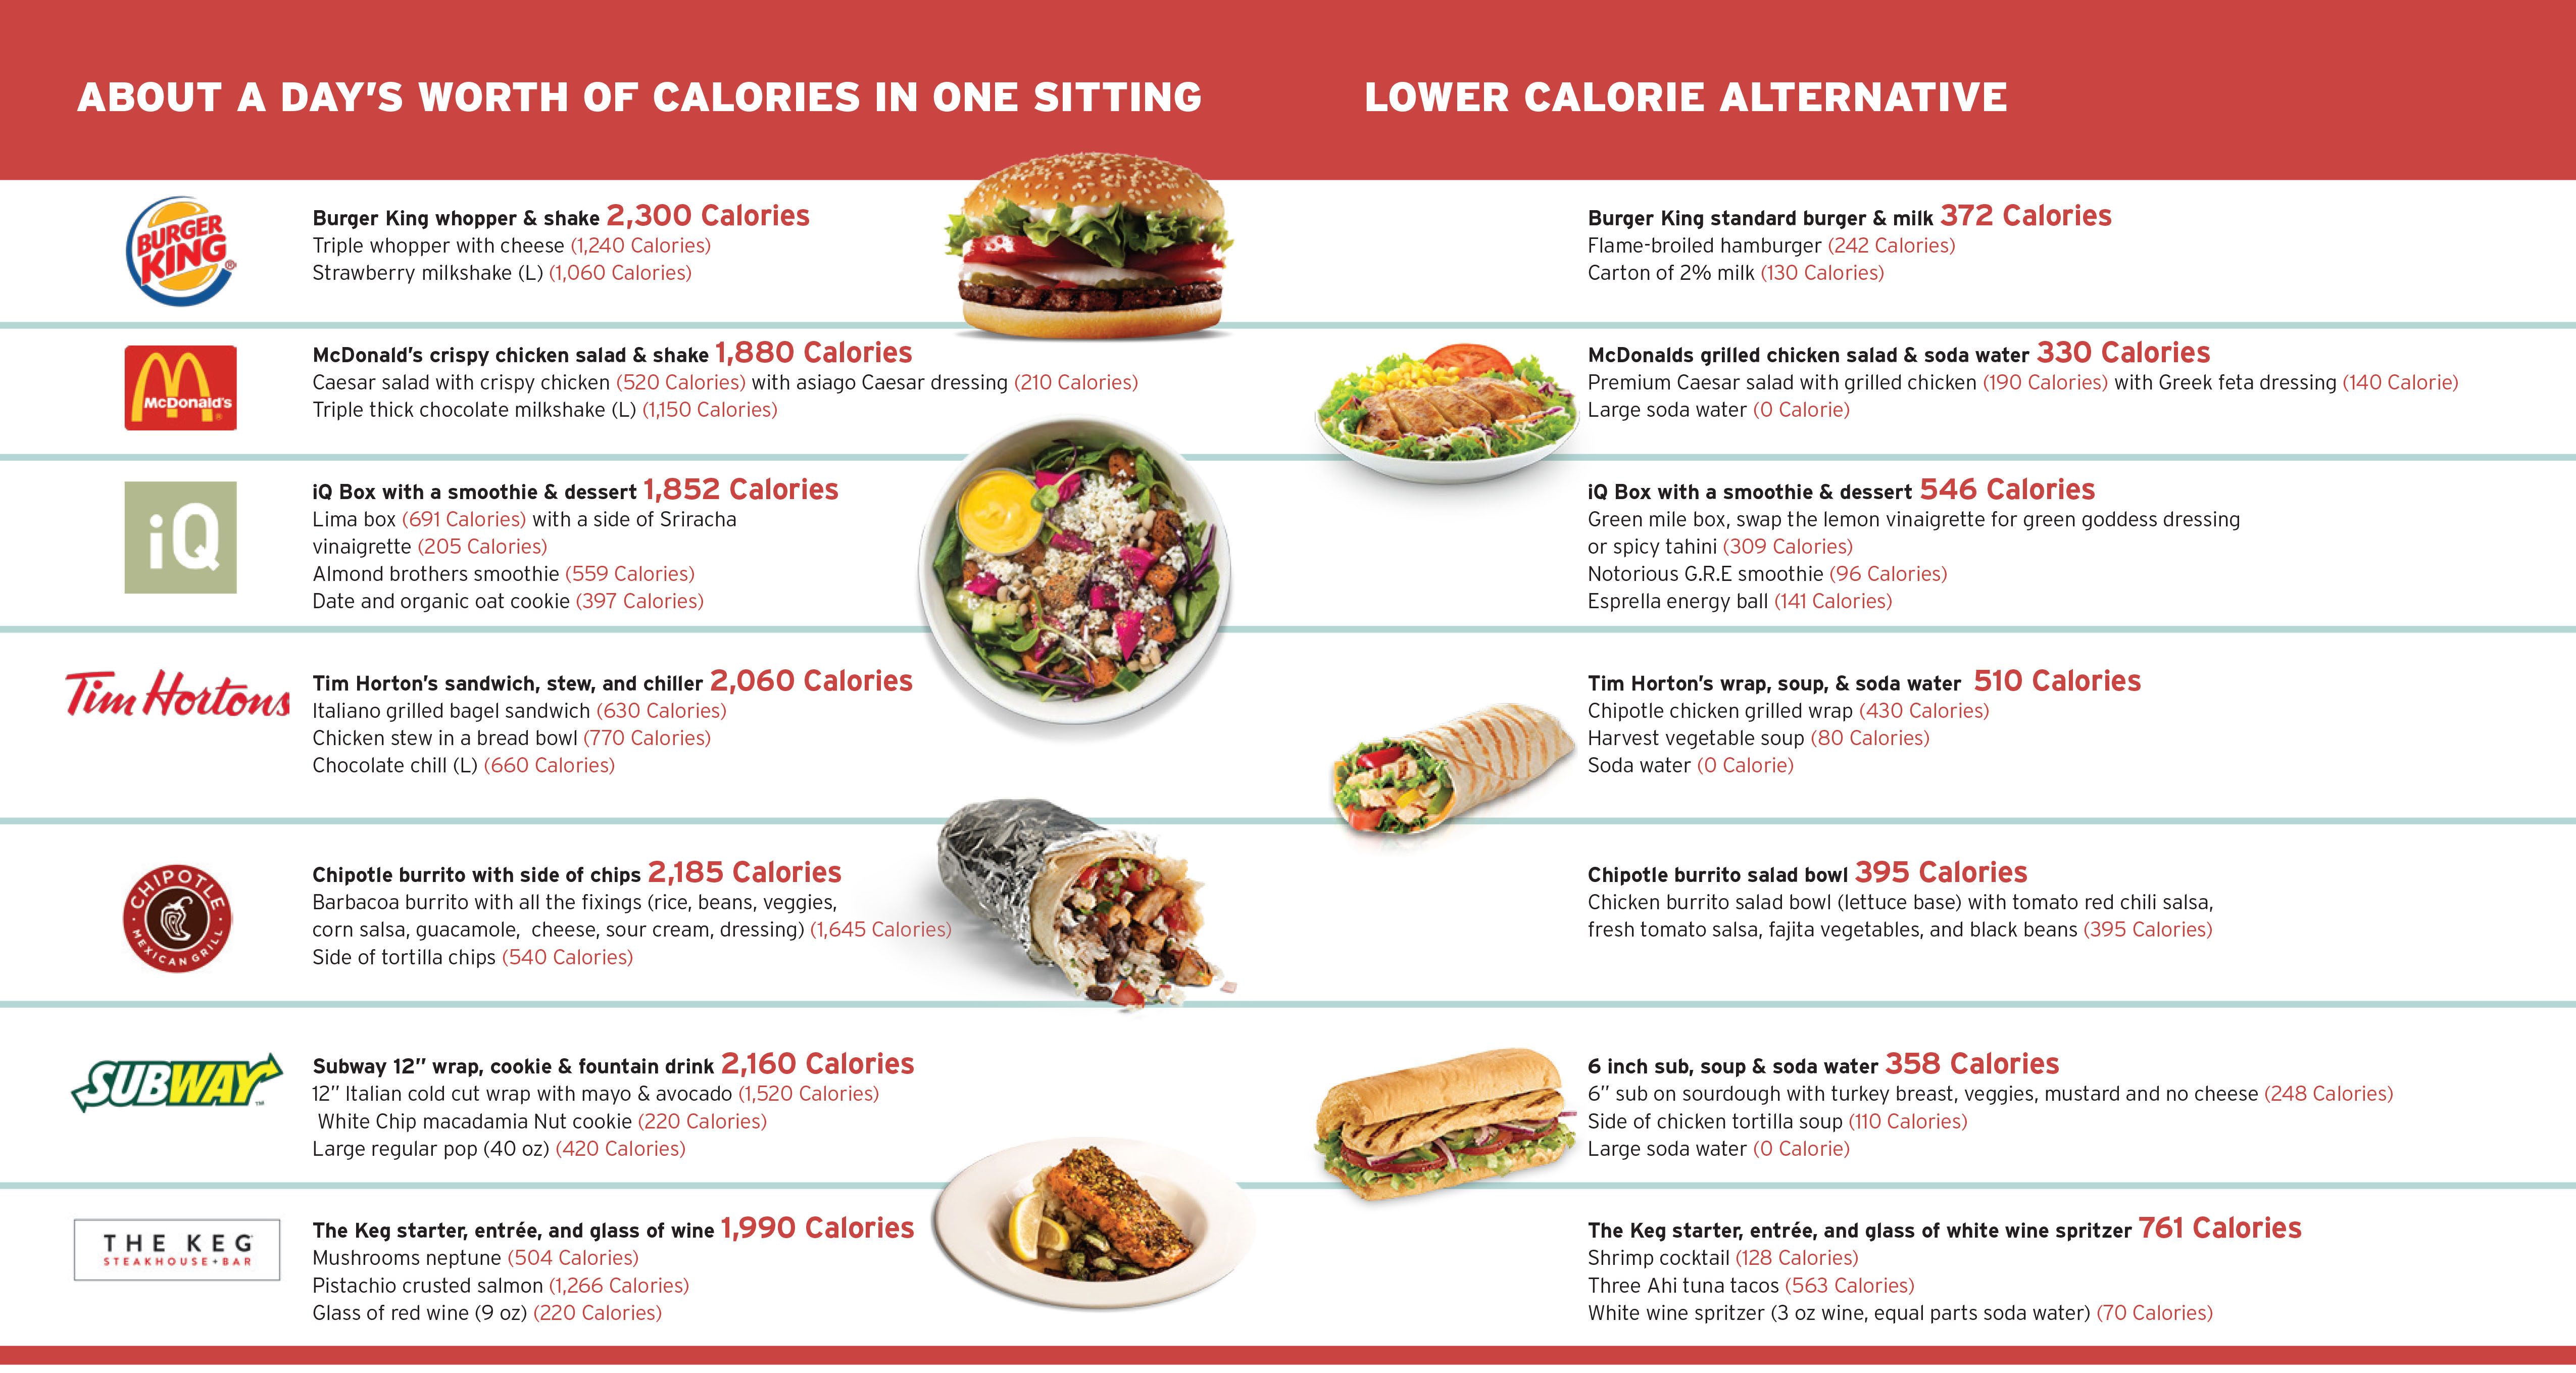 How to save hundreds of calories from your fast food meal - National